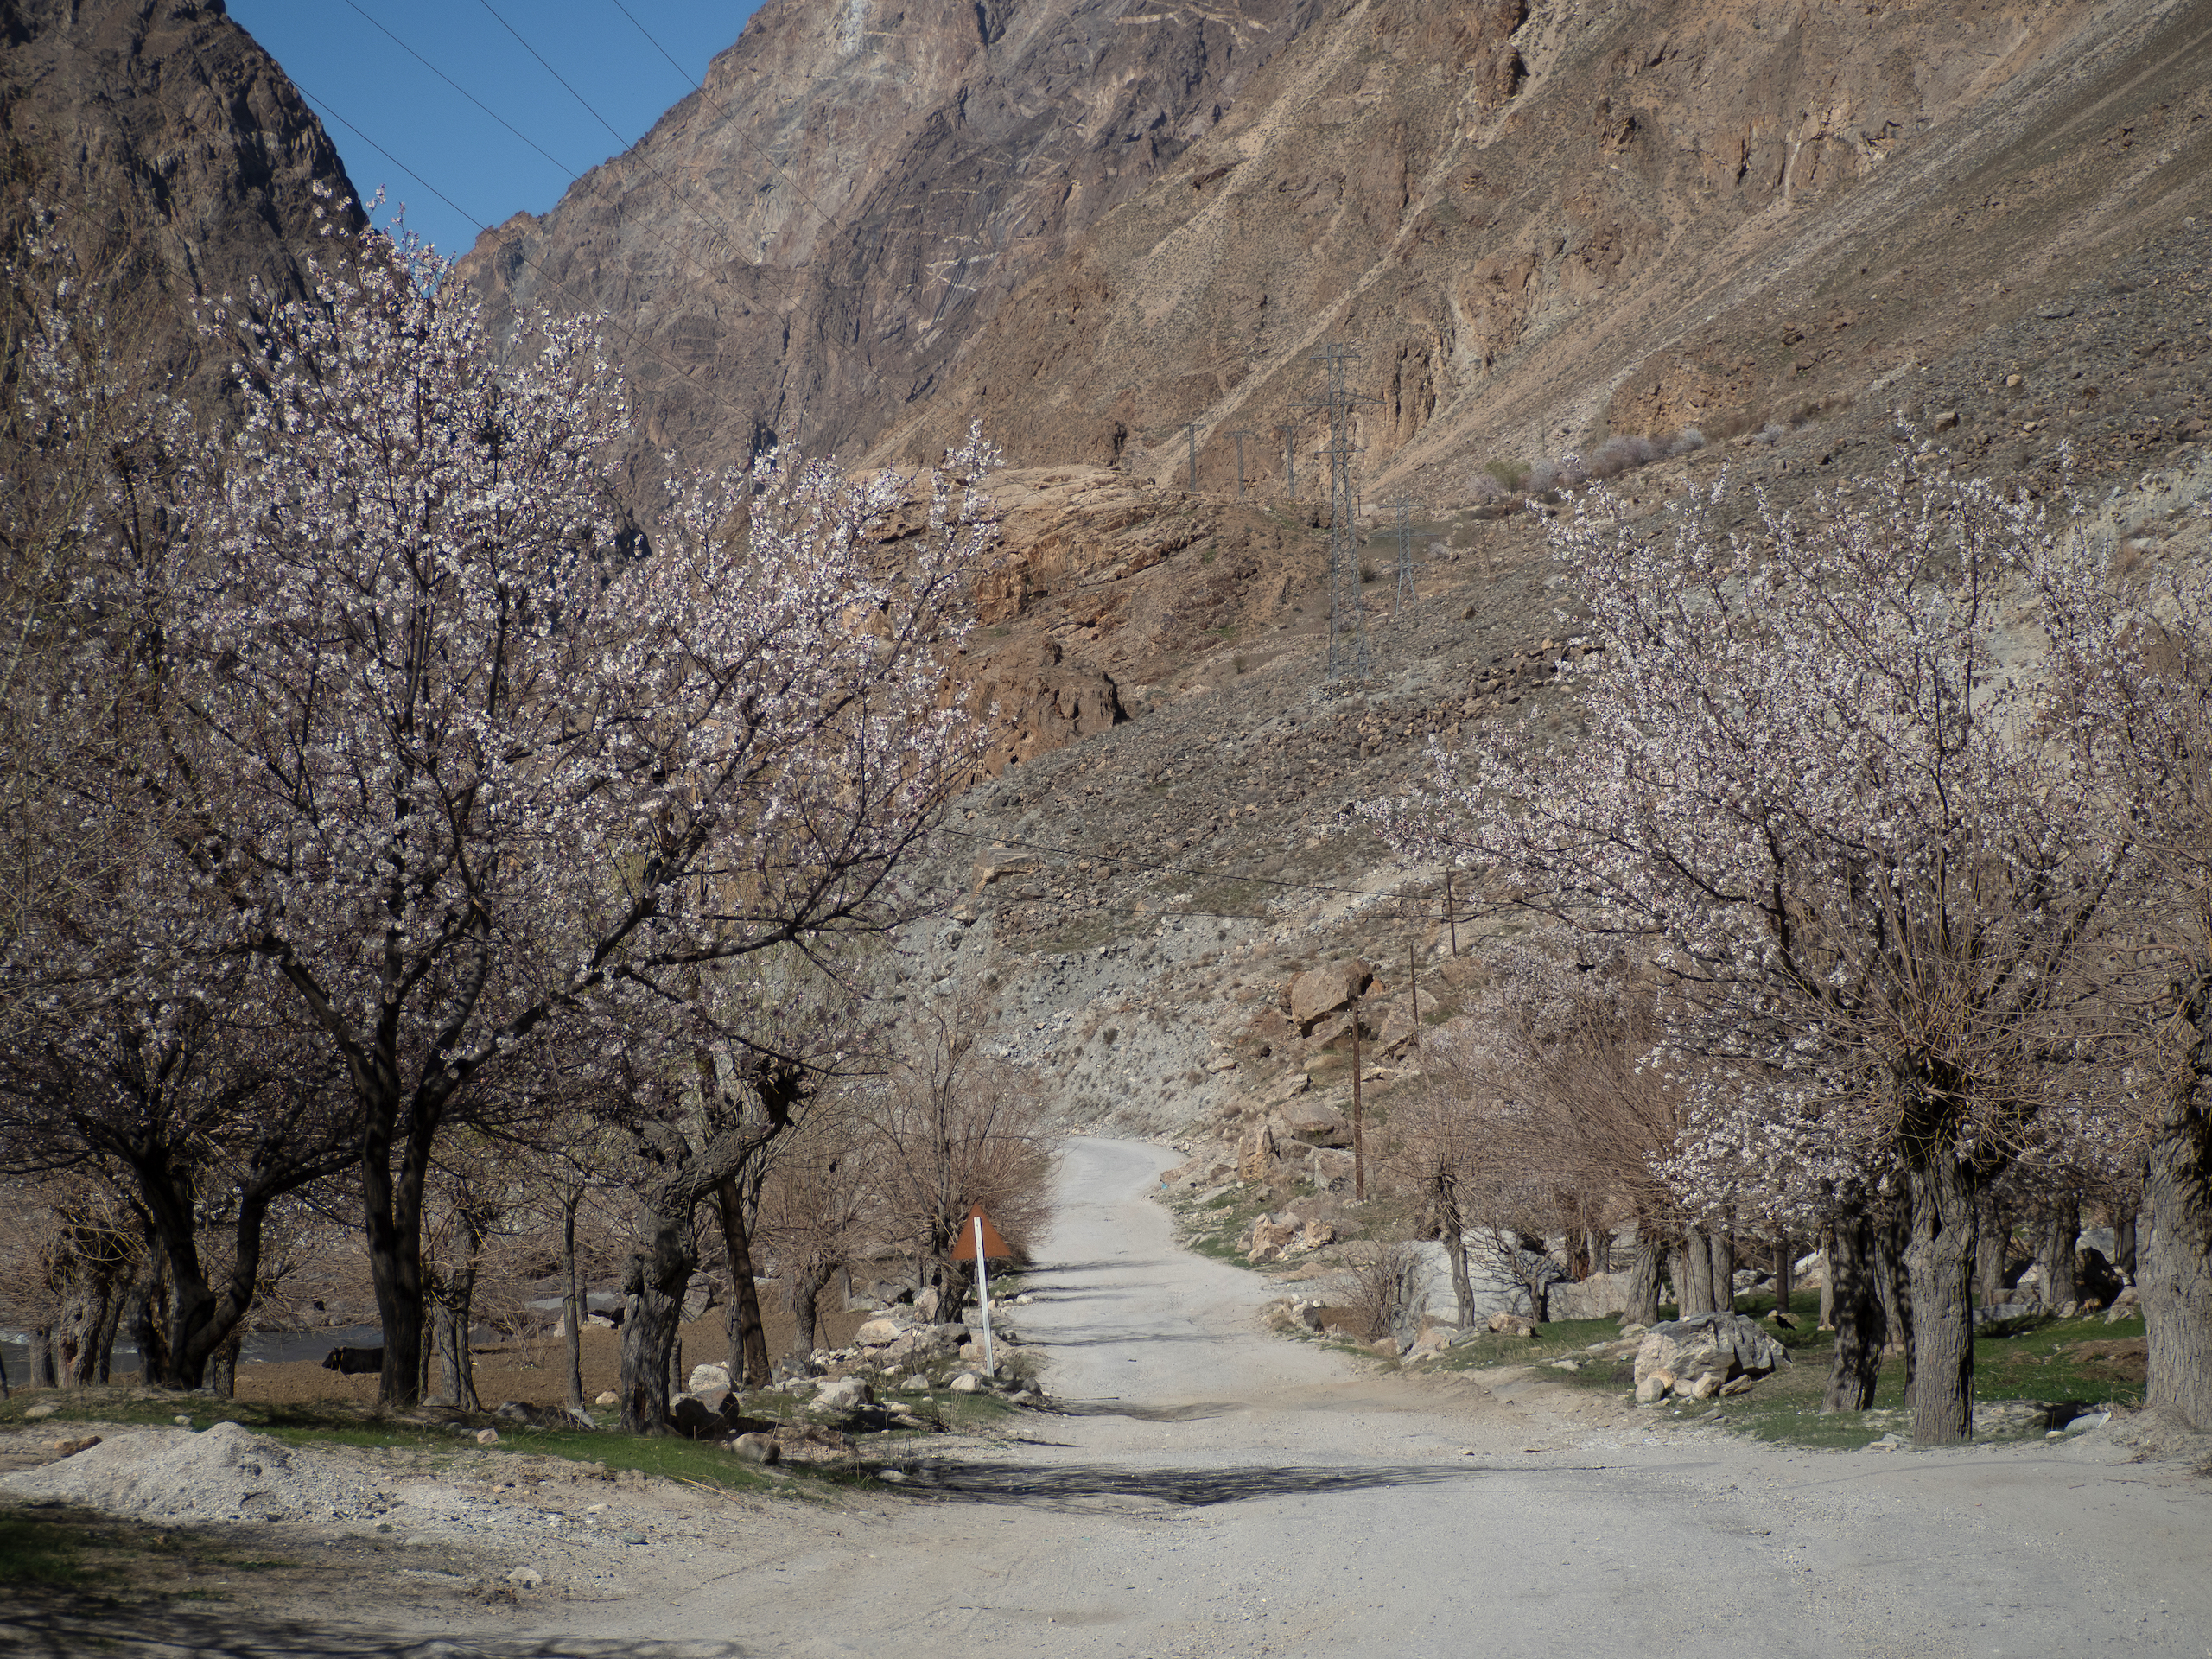 The Pamir Highway, flanked by flowering cherry trees in April 2022, as it passes through a village in Rushan district, Tajikistan 